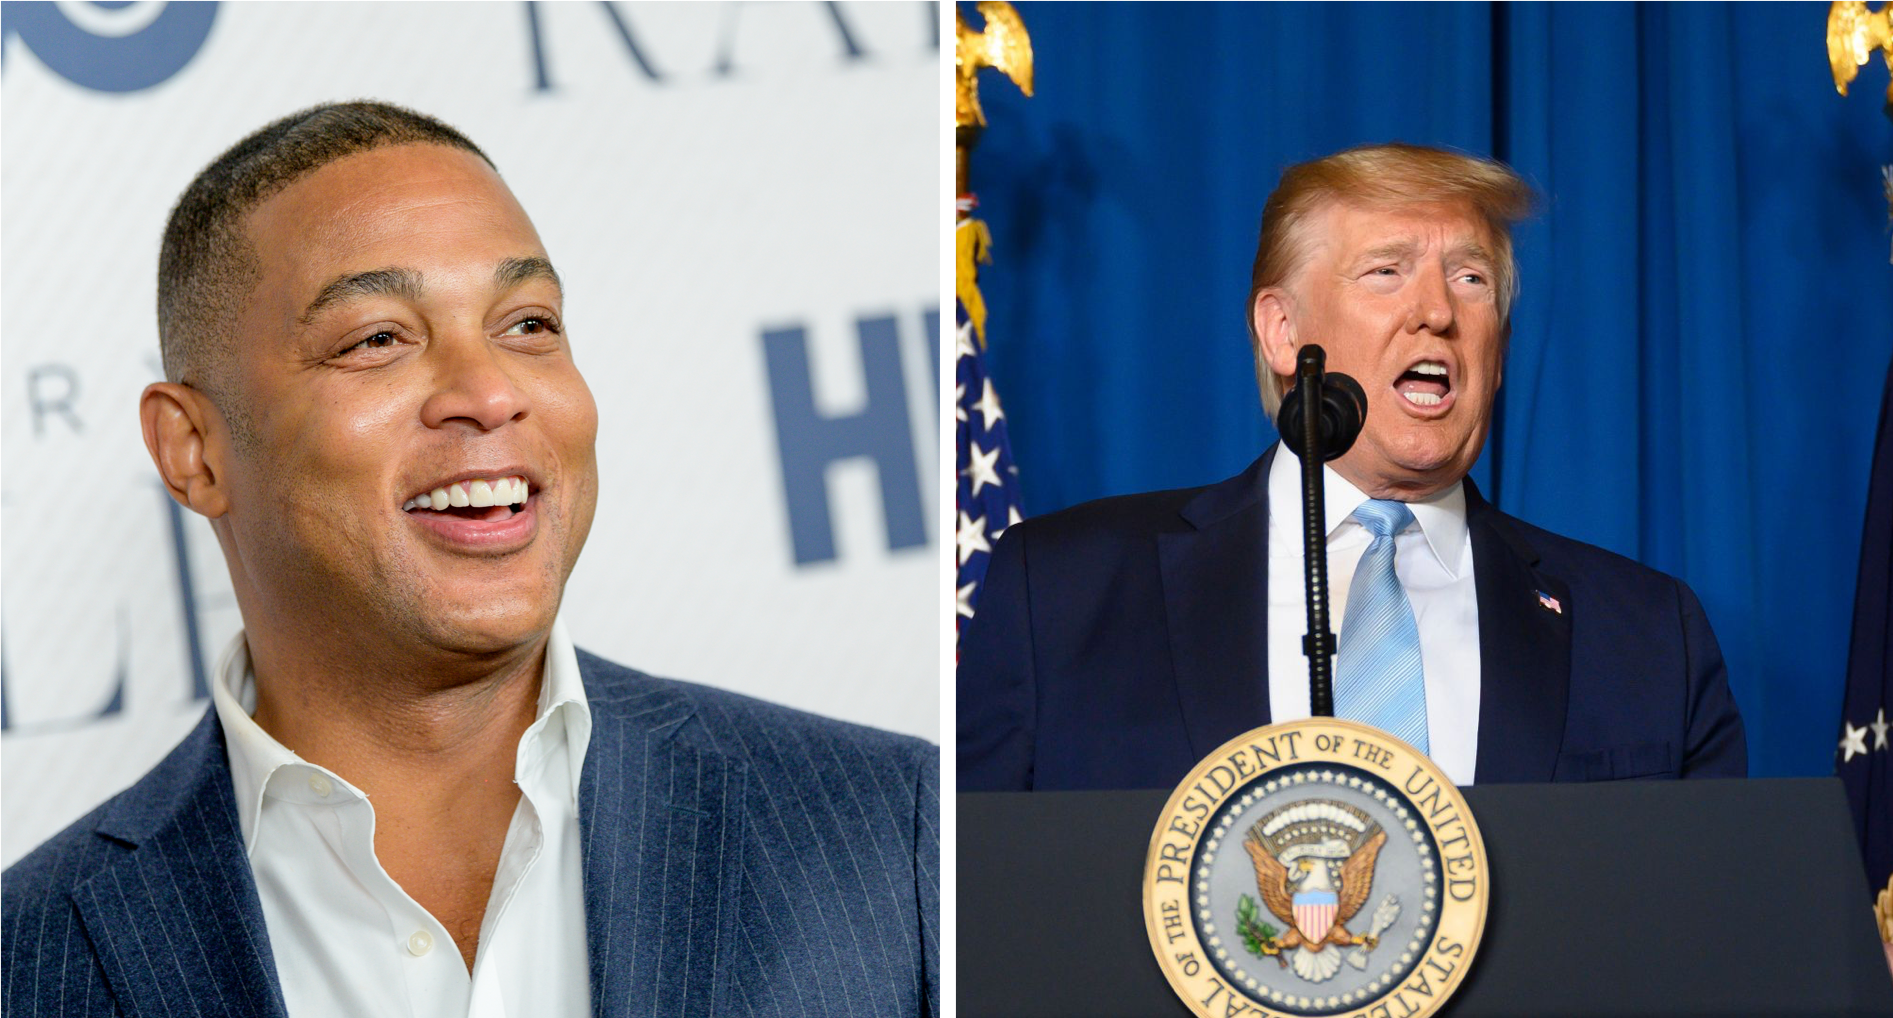 Don Lemon Unleashes On Donald Trump: ‘No One Wants To Hear From You Right Now’